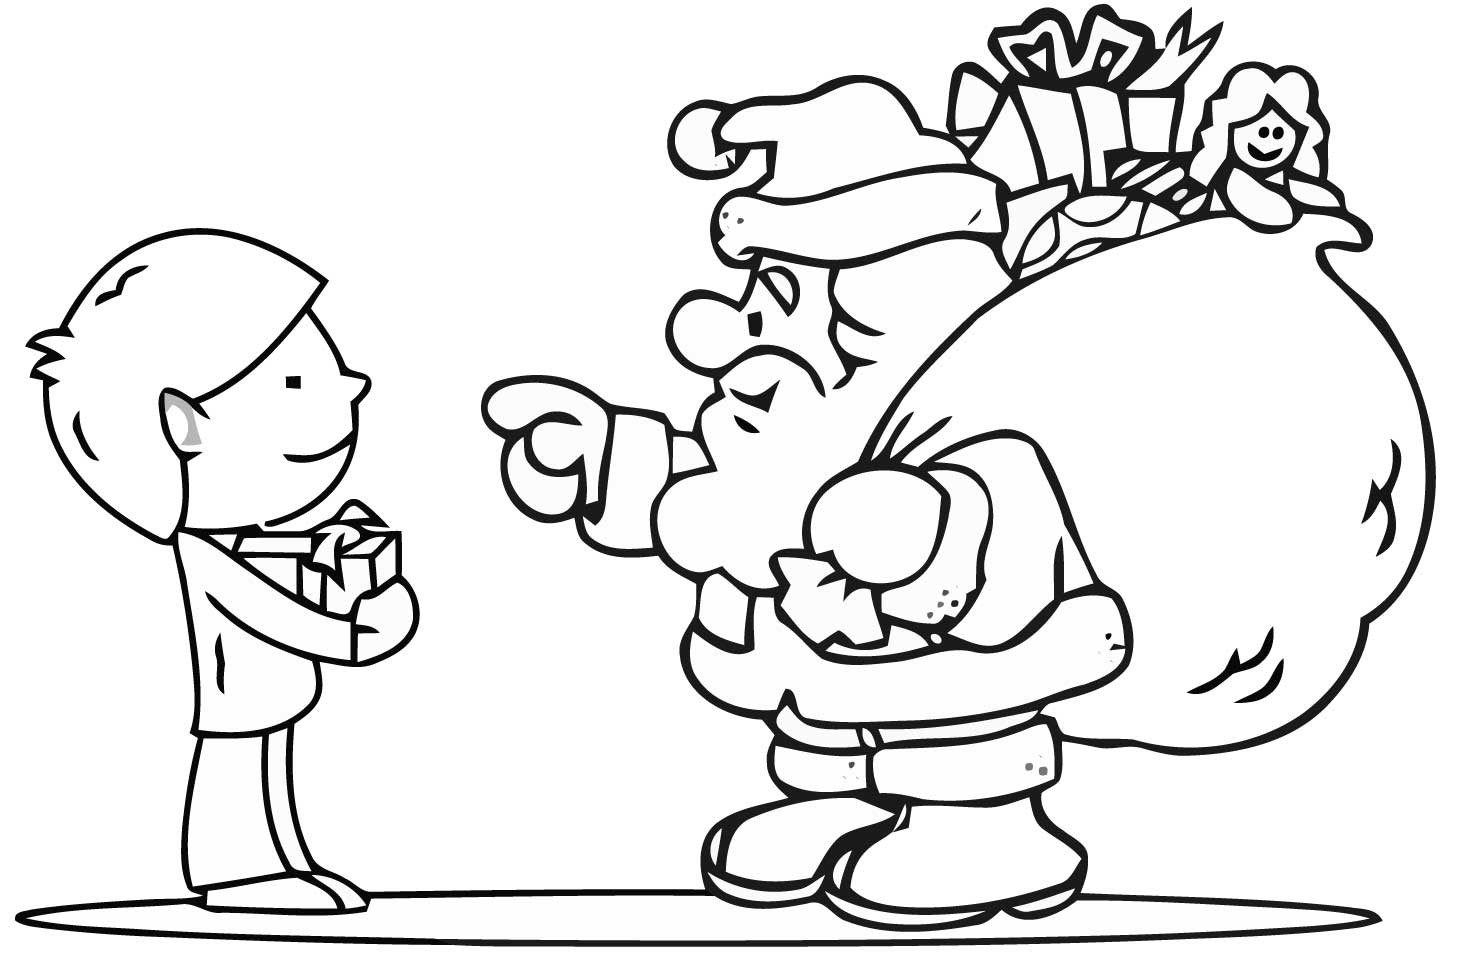 Free Christmas Coloring Pages For Kids
 Free Christmas Colouring Pages For Children